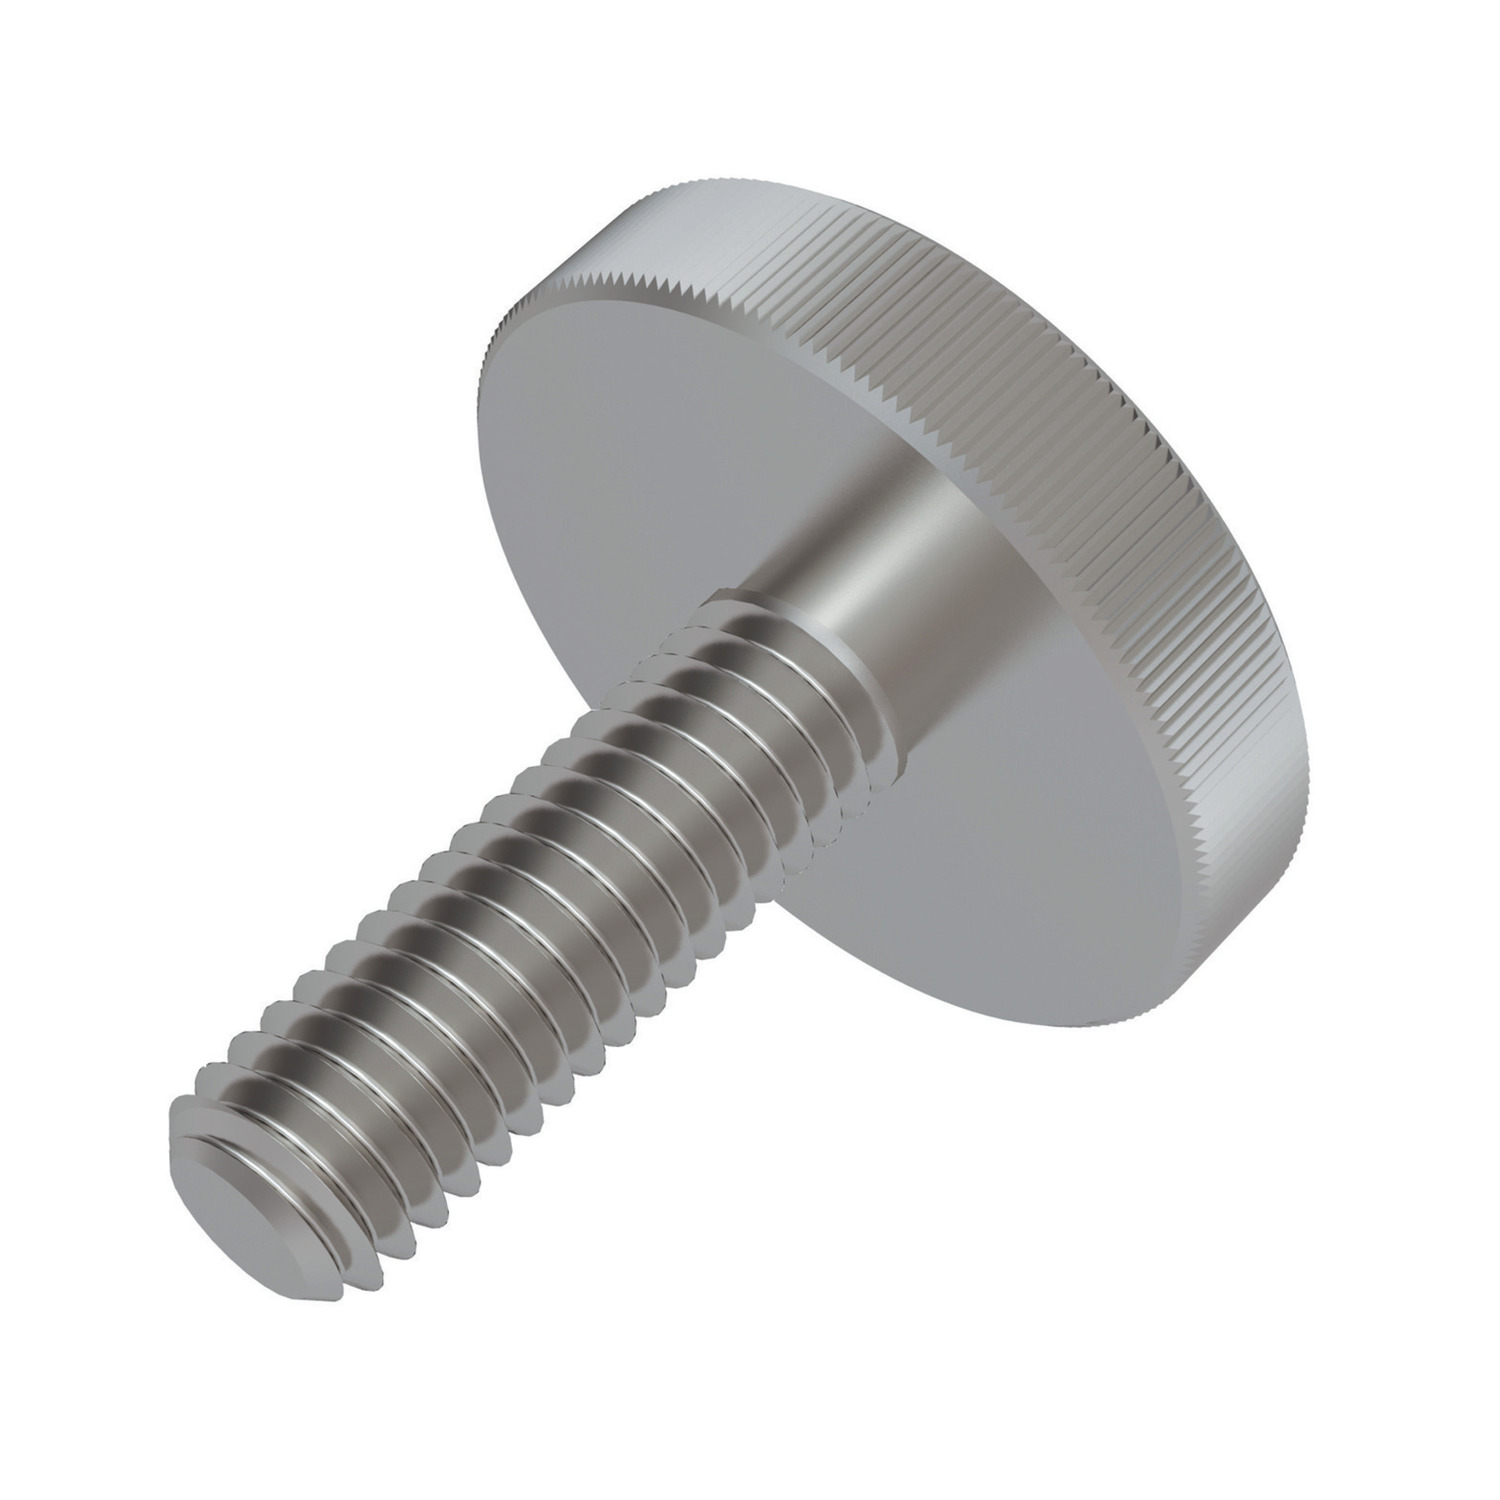 Product P0405.SS, Flat Knurled Thumb Screws Flat Knurled A2 & A4 stainless / 